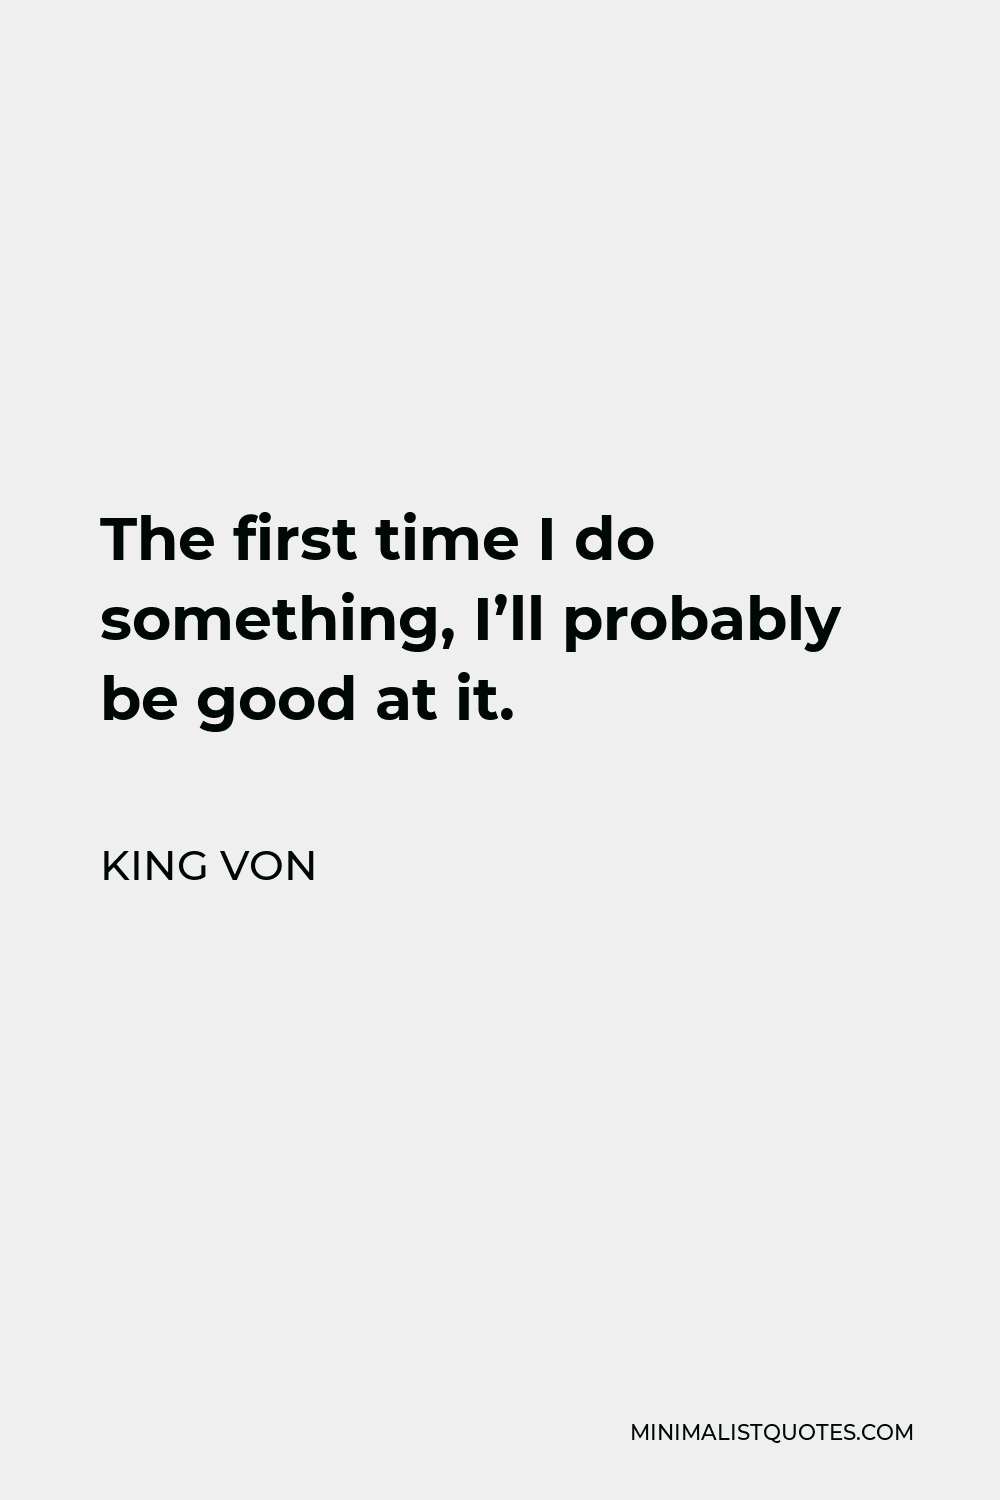 King Von Quote - The first time I do something, I’ll probably be good at it.